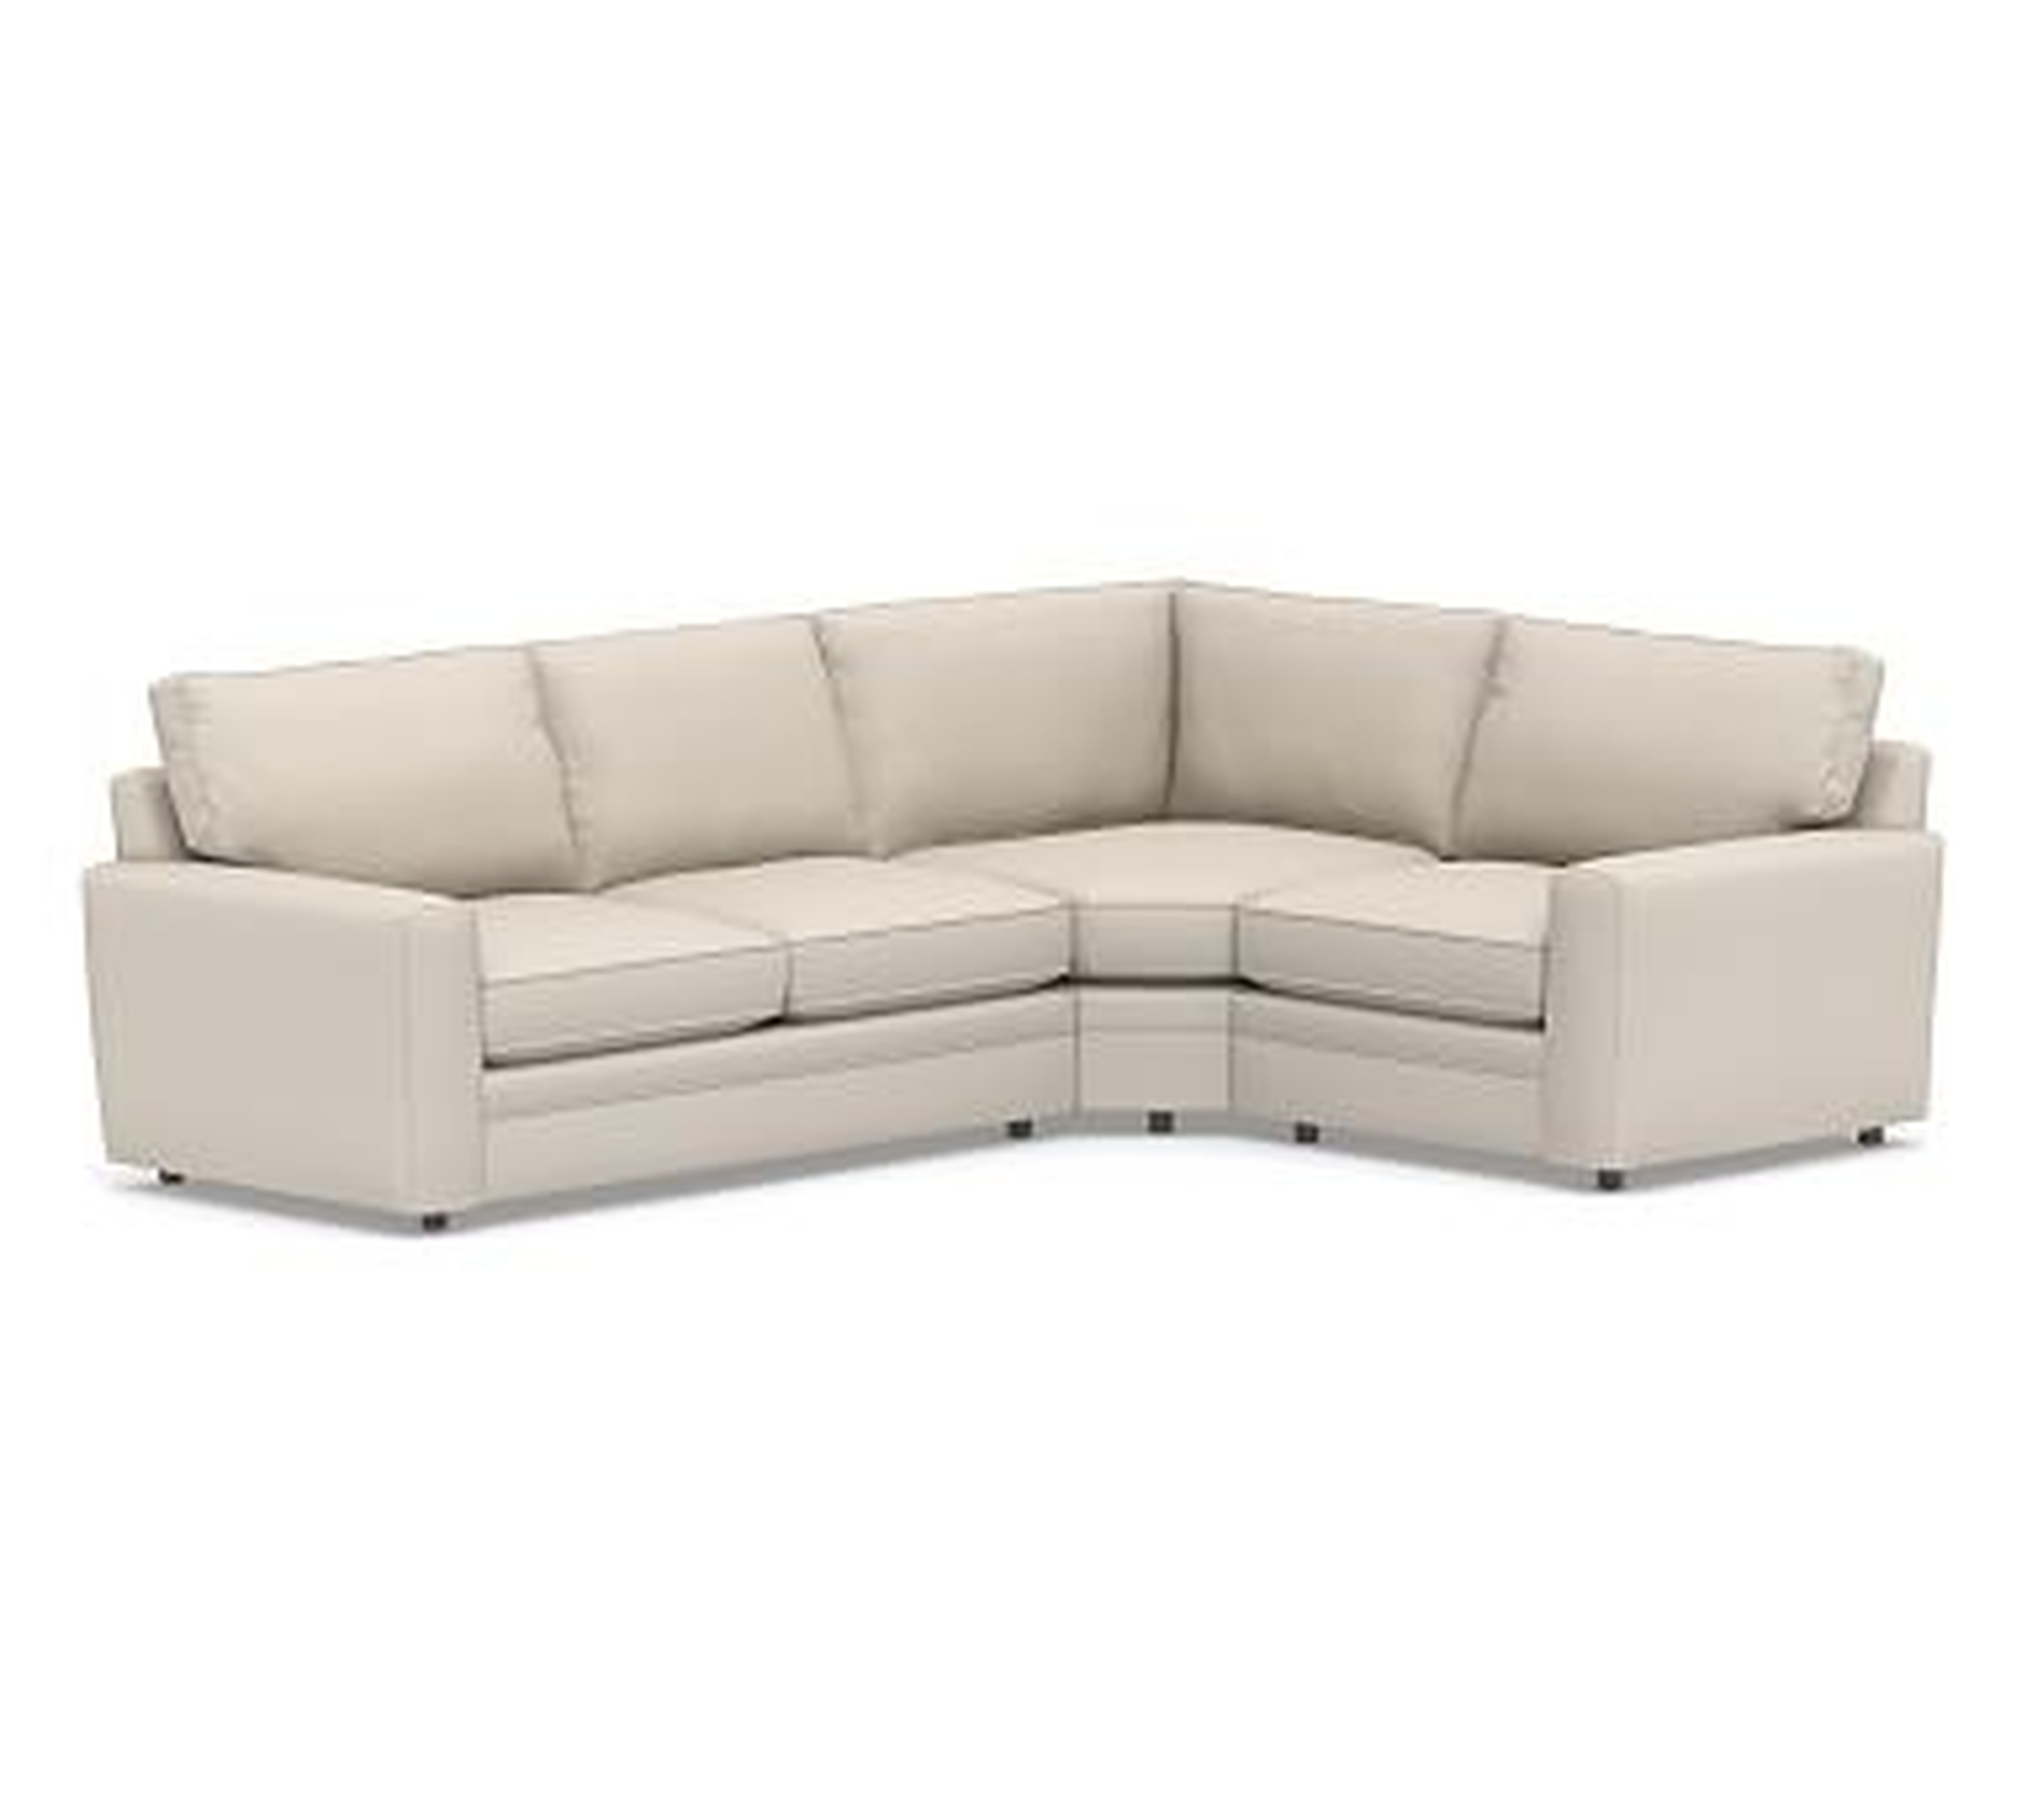 Pearce Square Arm Upholstered Left 3-Piece Wedge Sectional, Down Blend Wrapped Cushions, Performance Brushed Basketweave Oatmeal - Pottery Barn